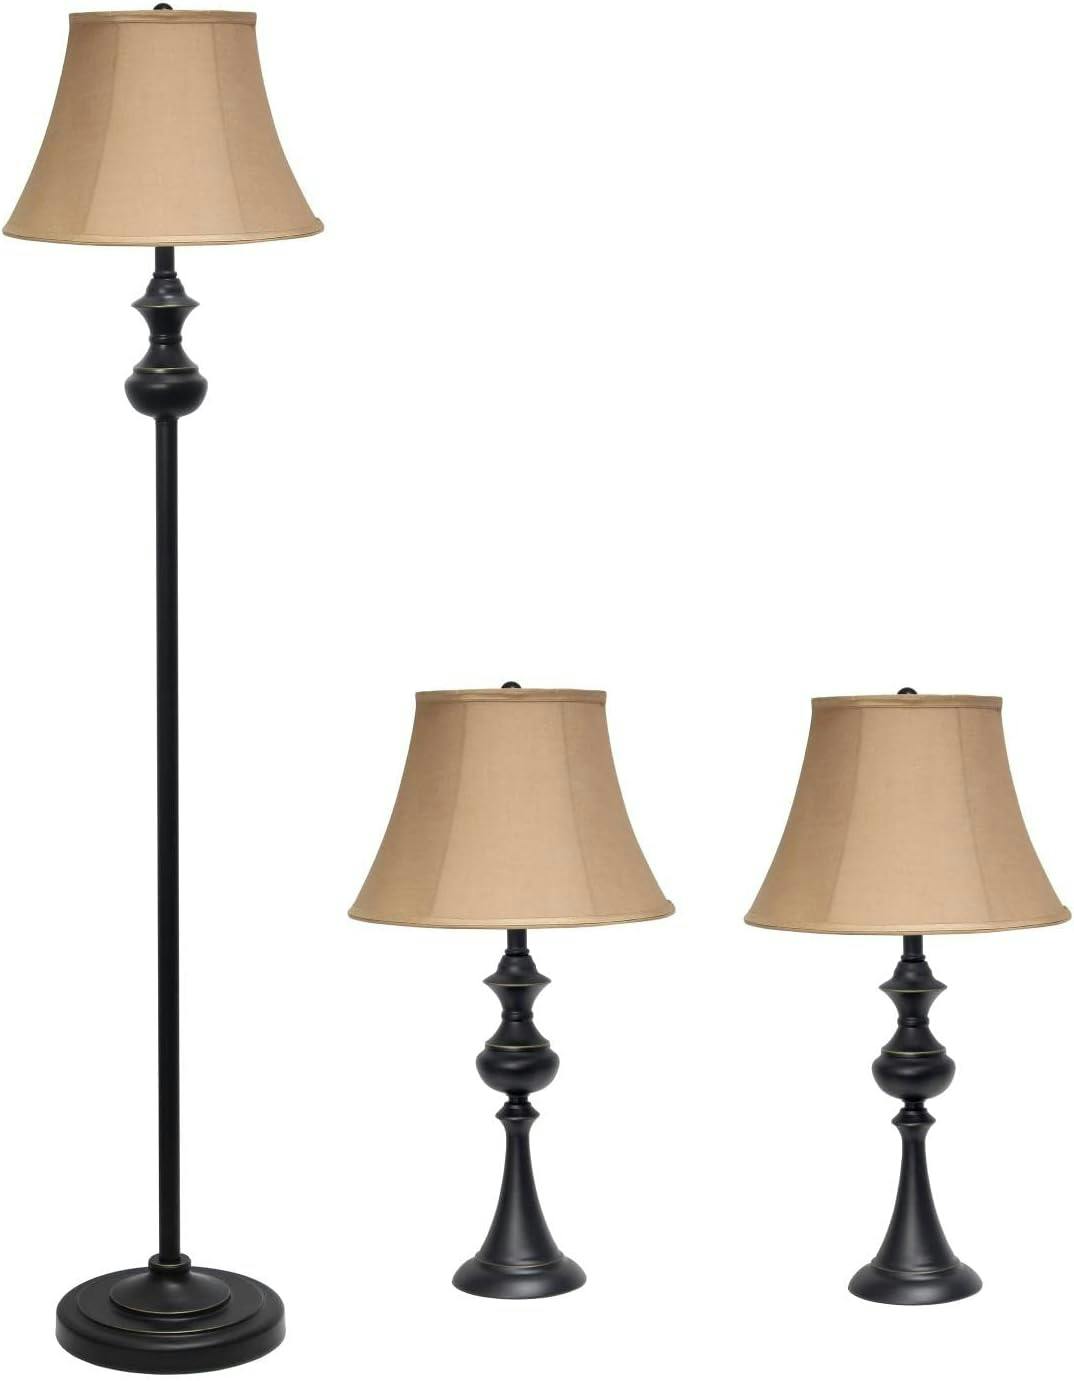 Timeless Elegance 3-Pack Lamp Set in Restoration Bronze with Tan Shades